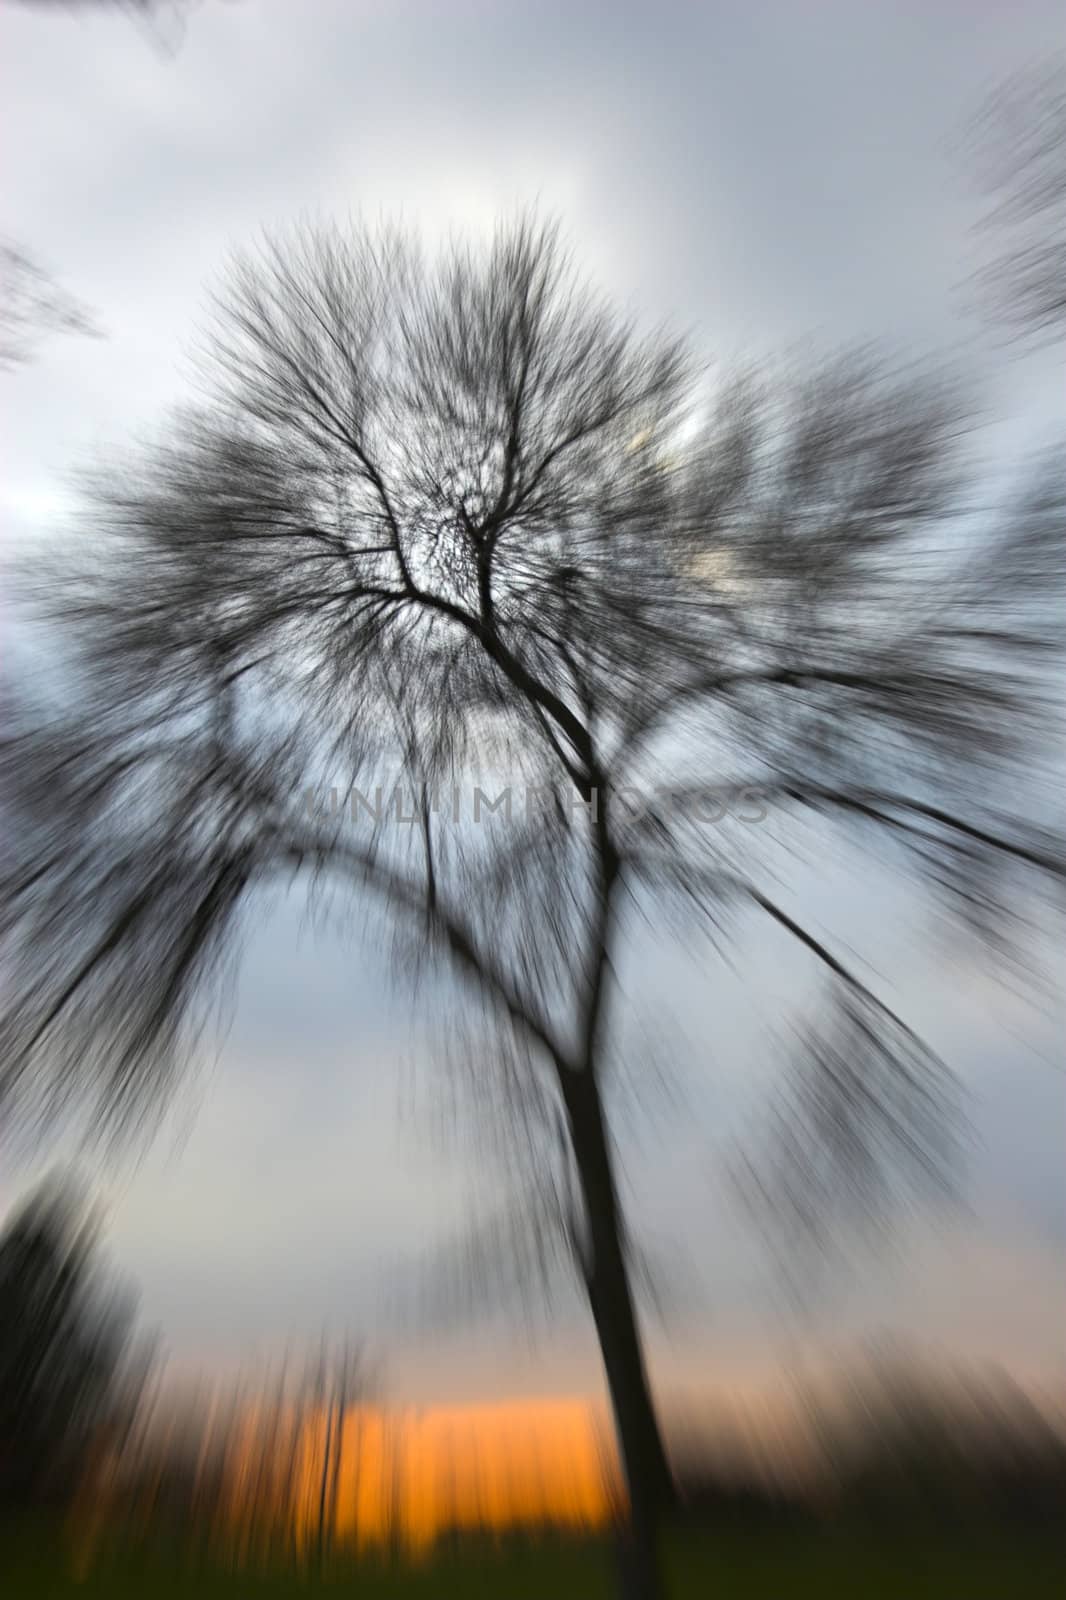 Tree zommed with the lens during shot looking like a falling tree